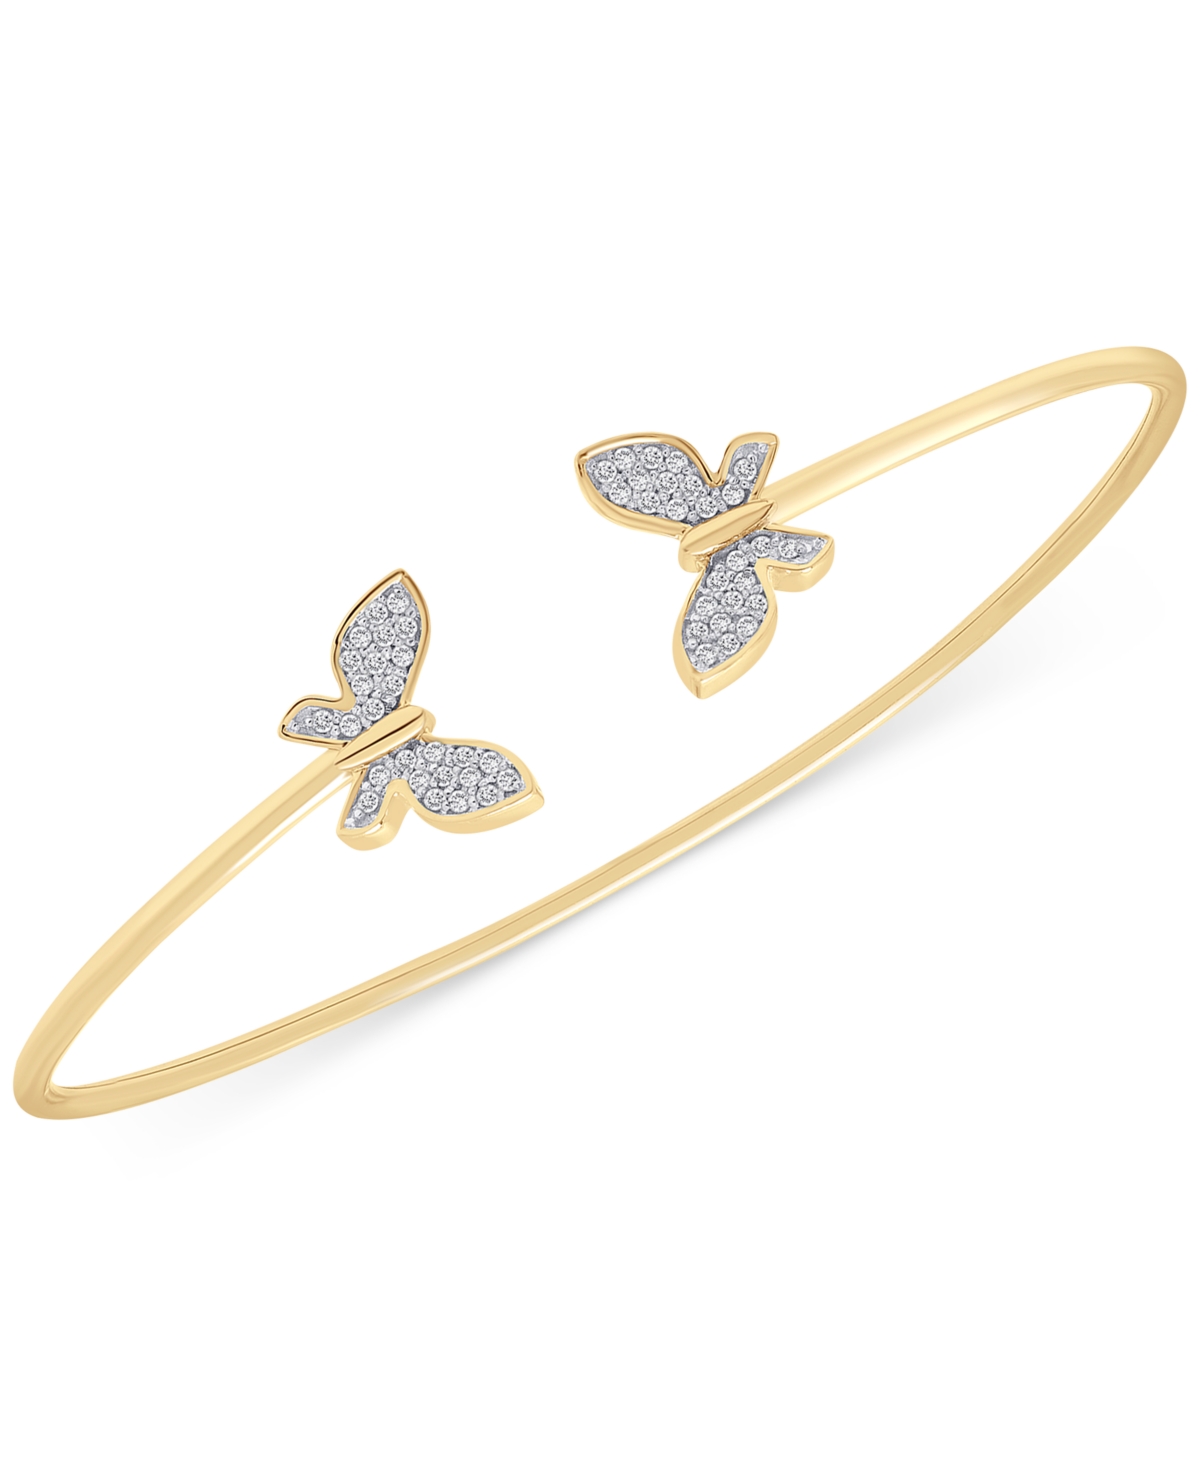 Diamond Butterfly Cuff Bangle Bracelet (1/6 ct. t.w.) in 14k Gold, Created for Macy's - Yellow Gold